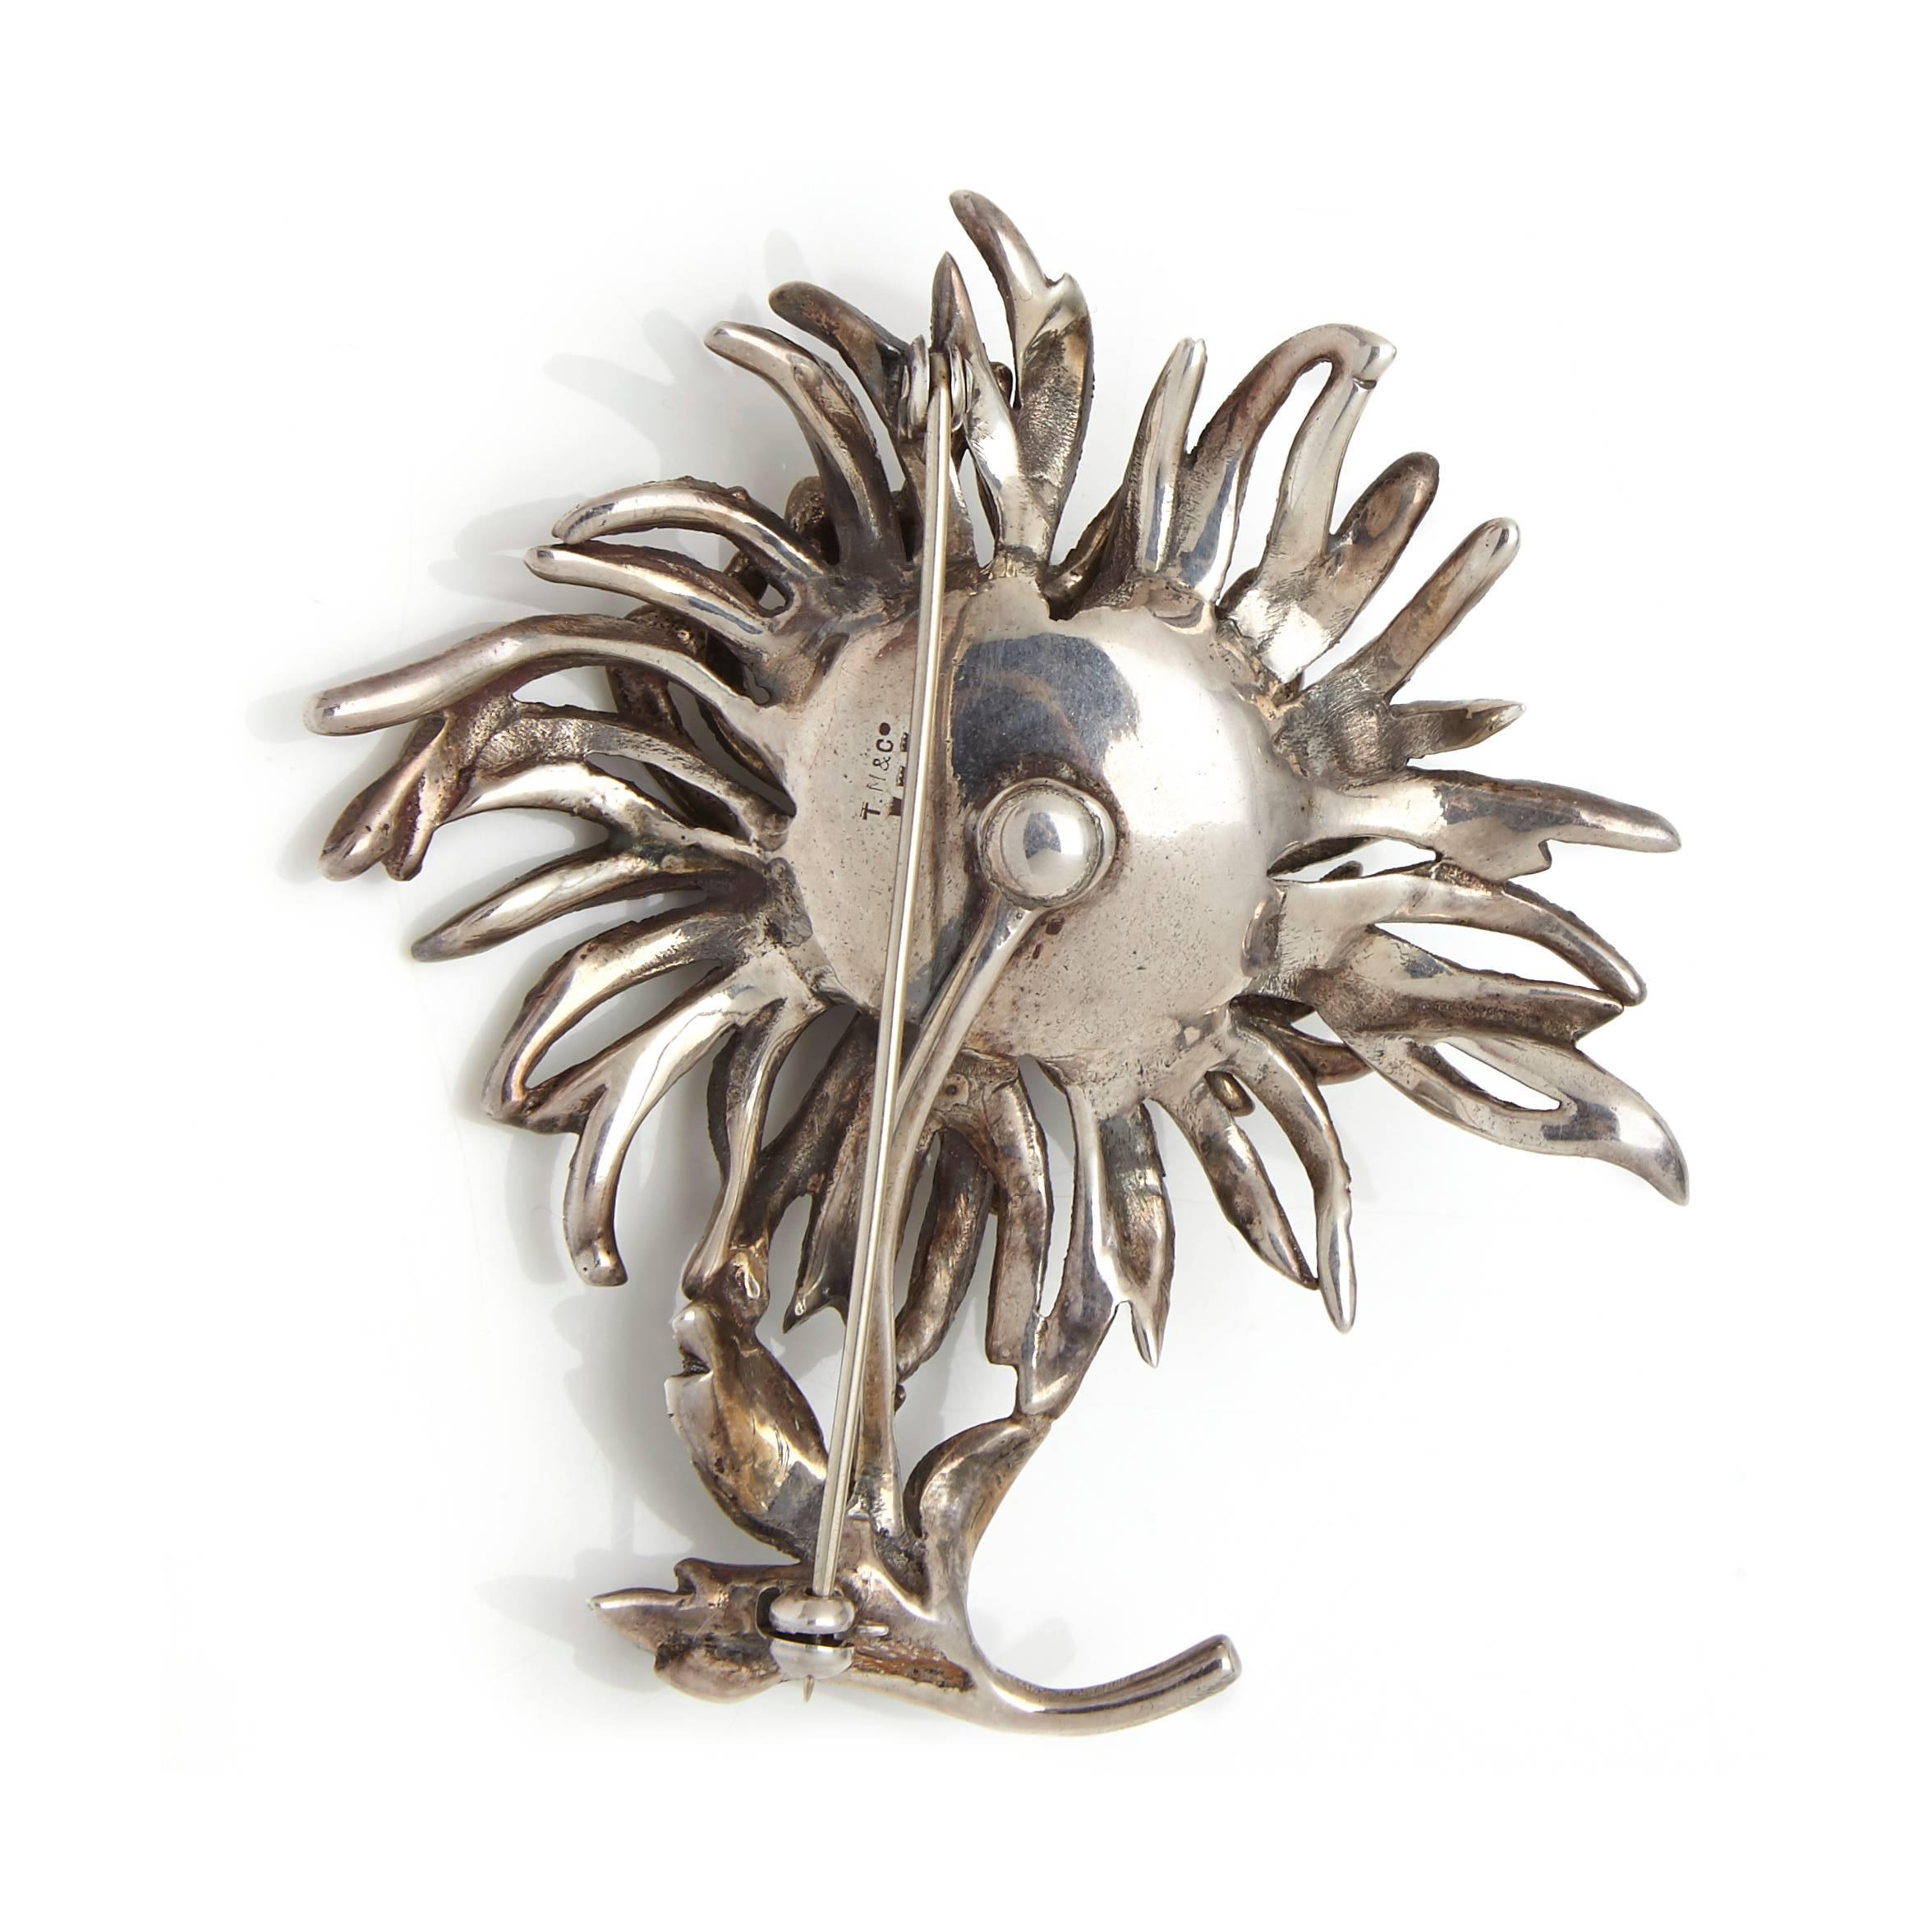 This beautifully observed sterling silver piece was designed by English silversmith Thomas L.Mott. It depicts an outward curving Chrysanthemum flower. The piece is solid but remains delicate, each petal is pave set with marcasite stones. A lovely